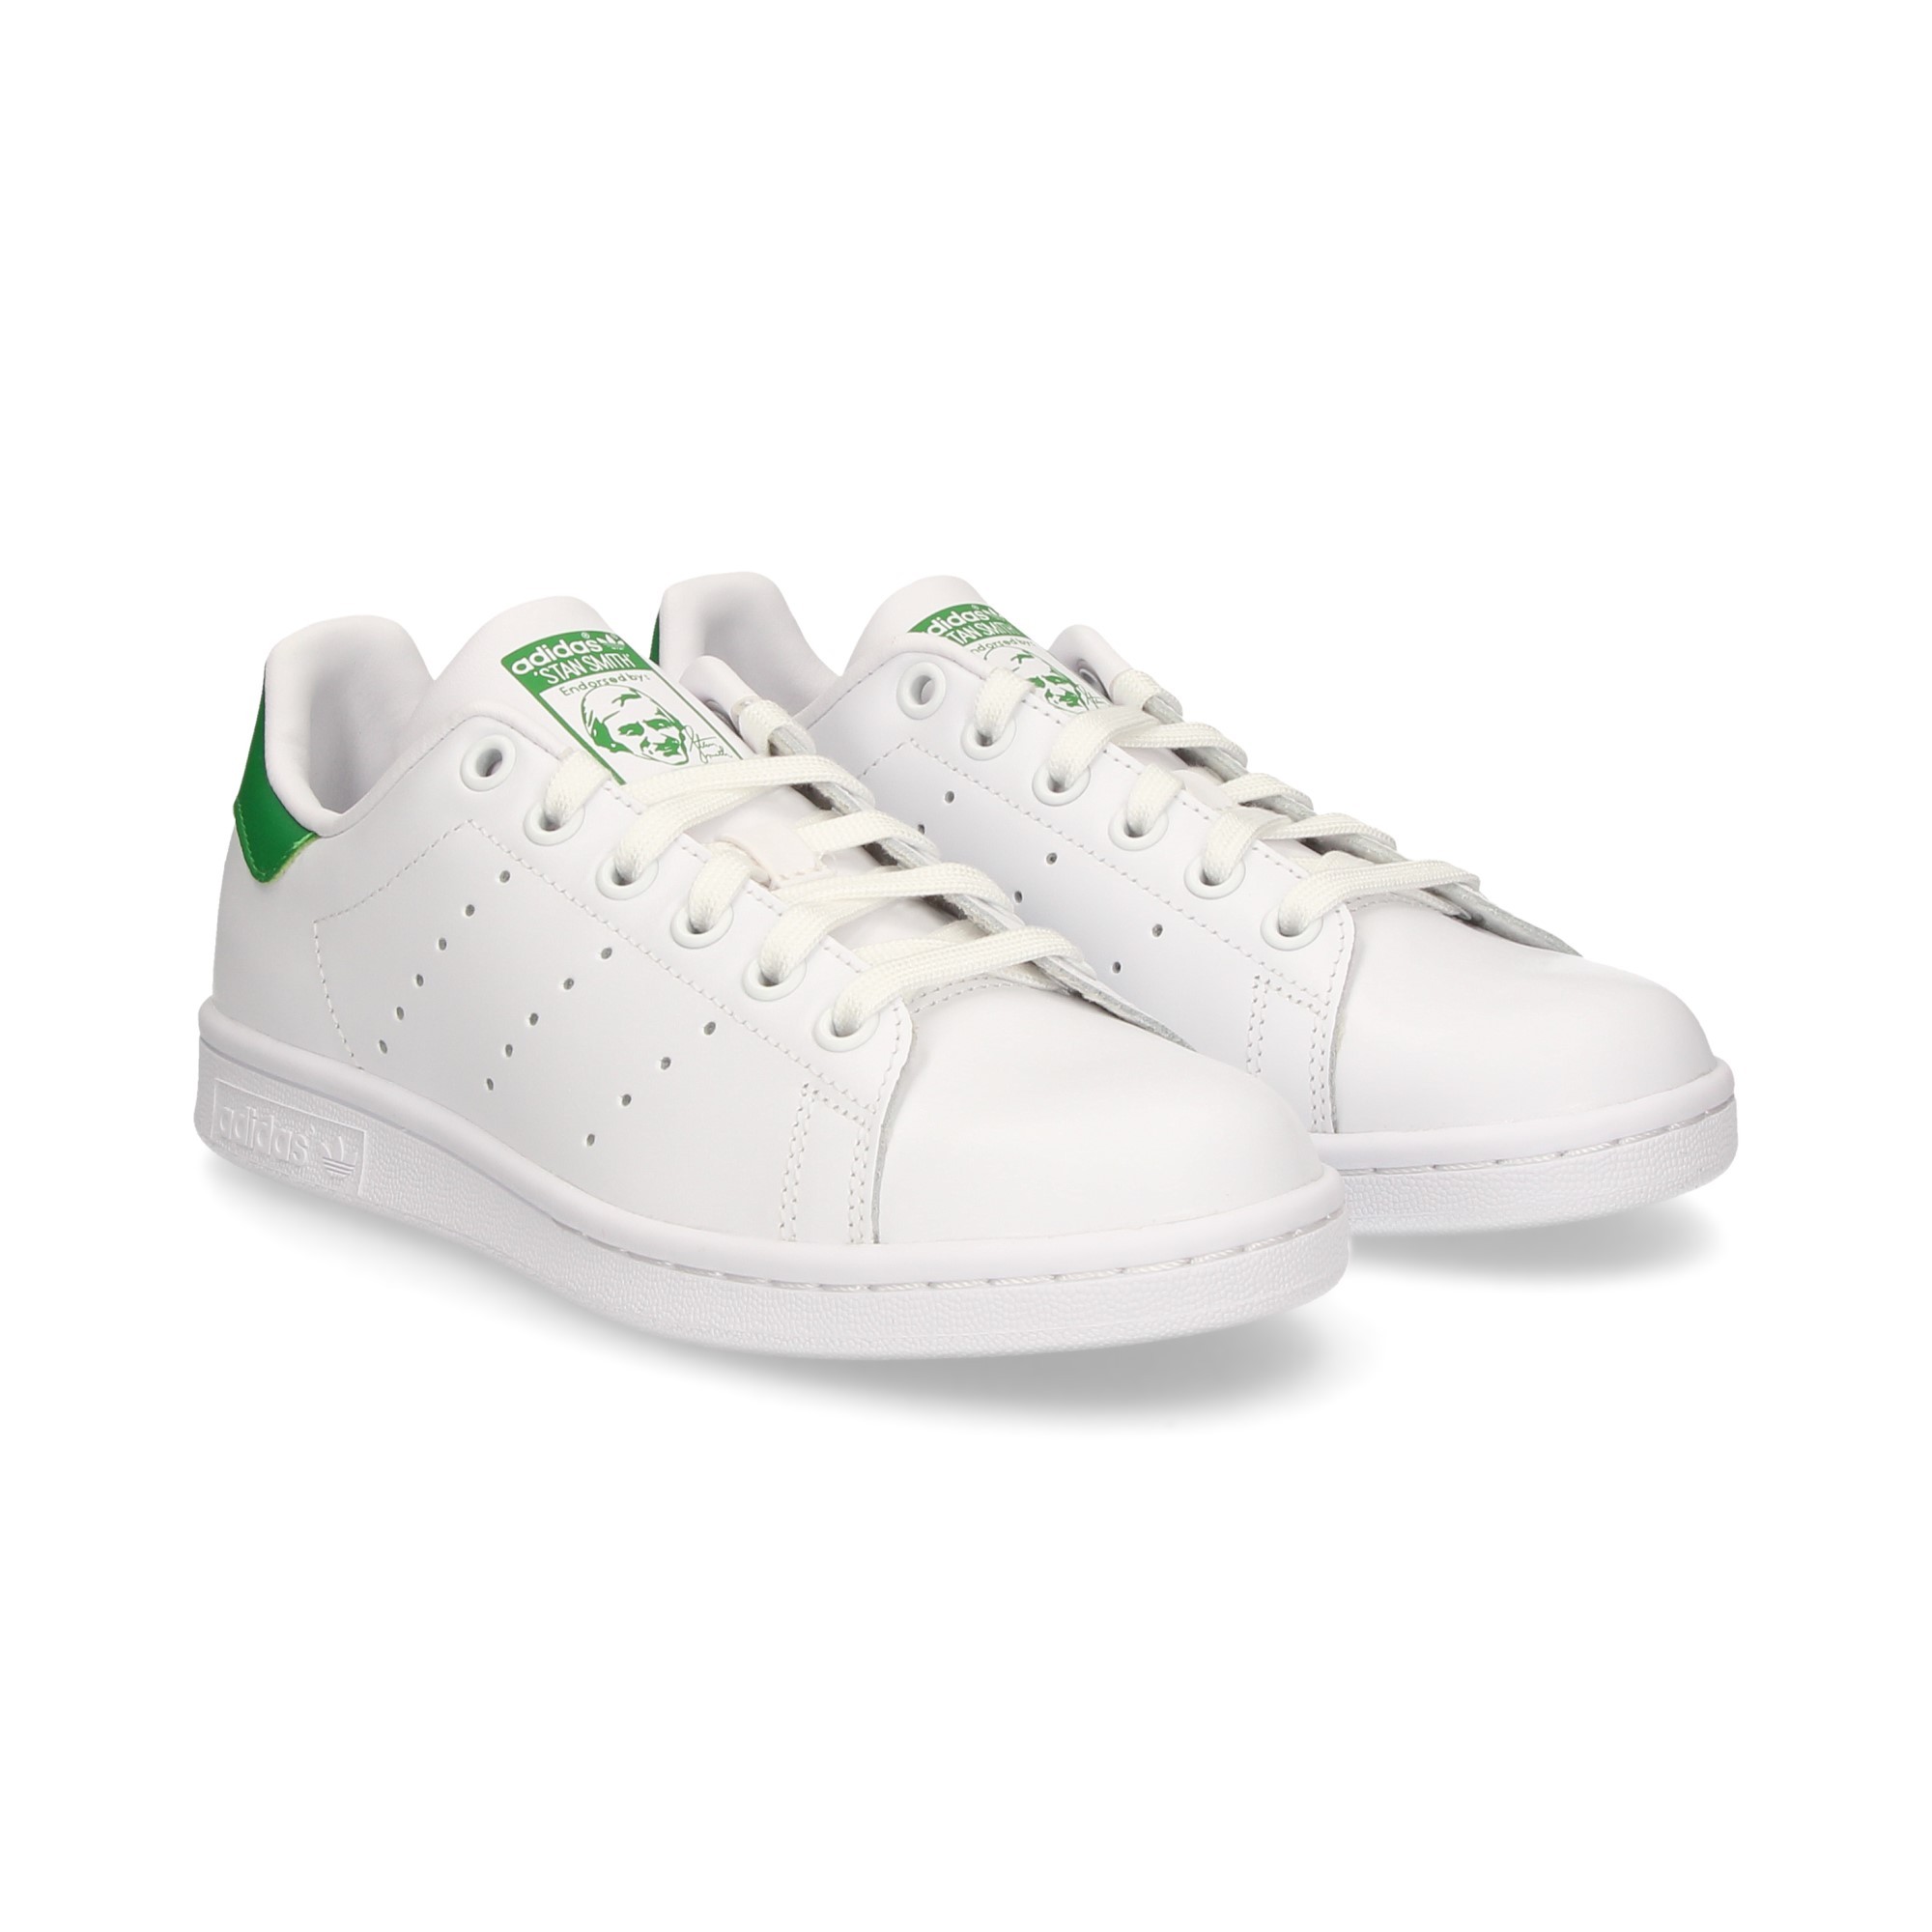 bandes-rayees-t-peau-blanche-verte